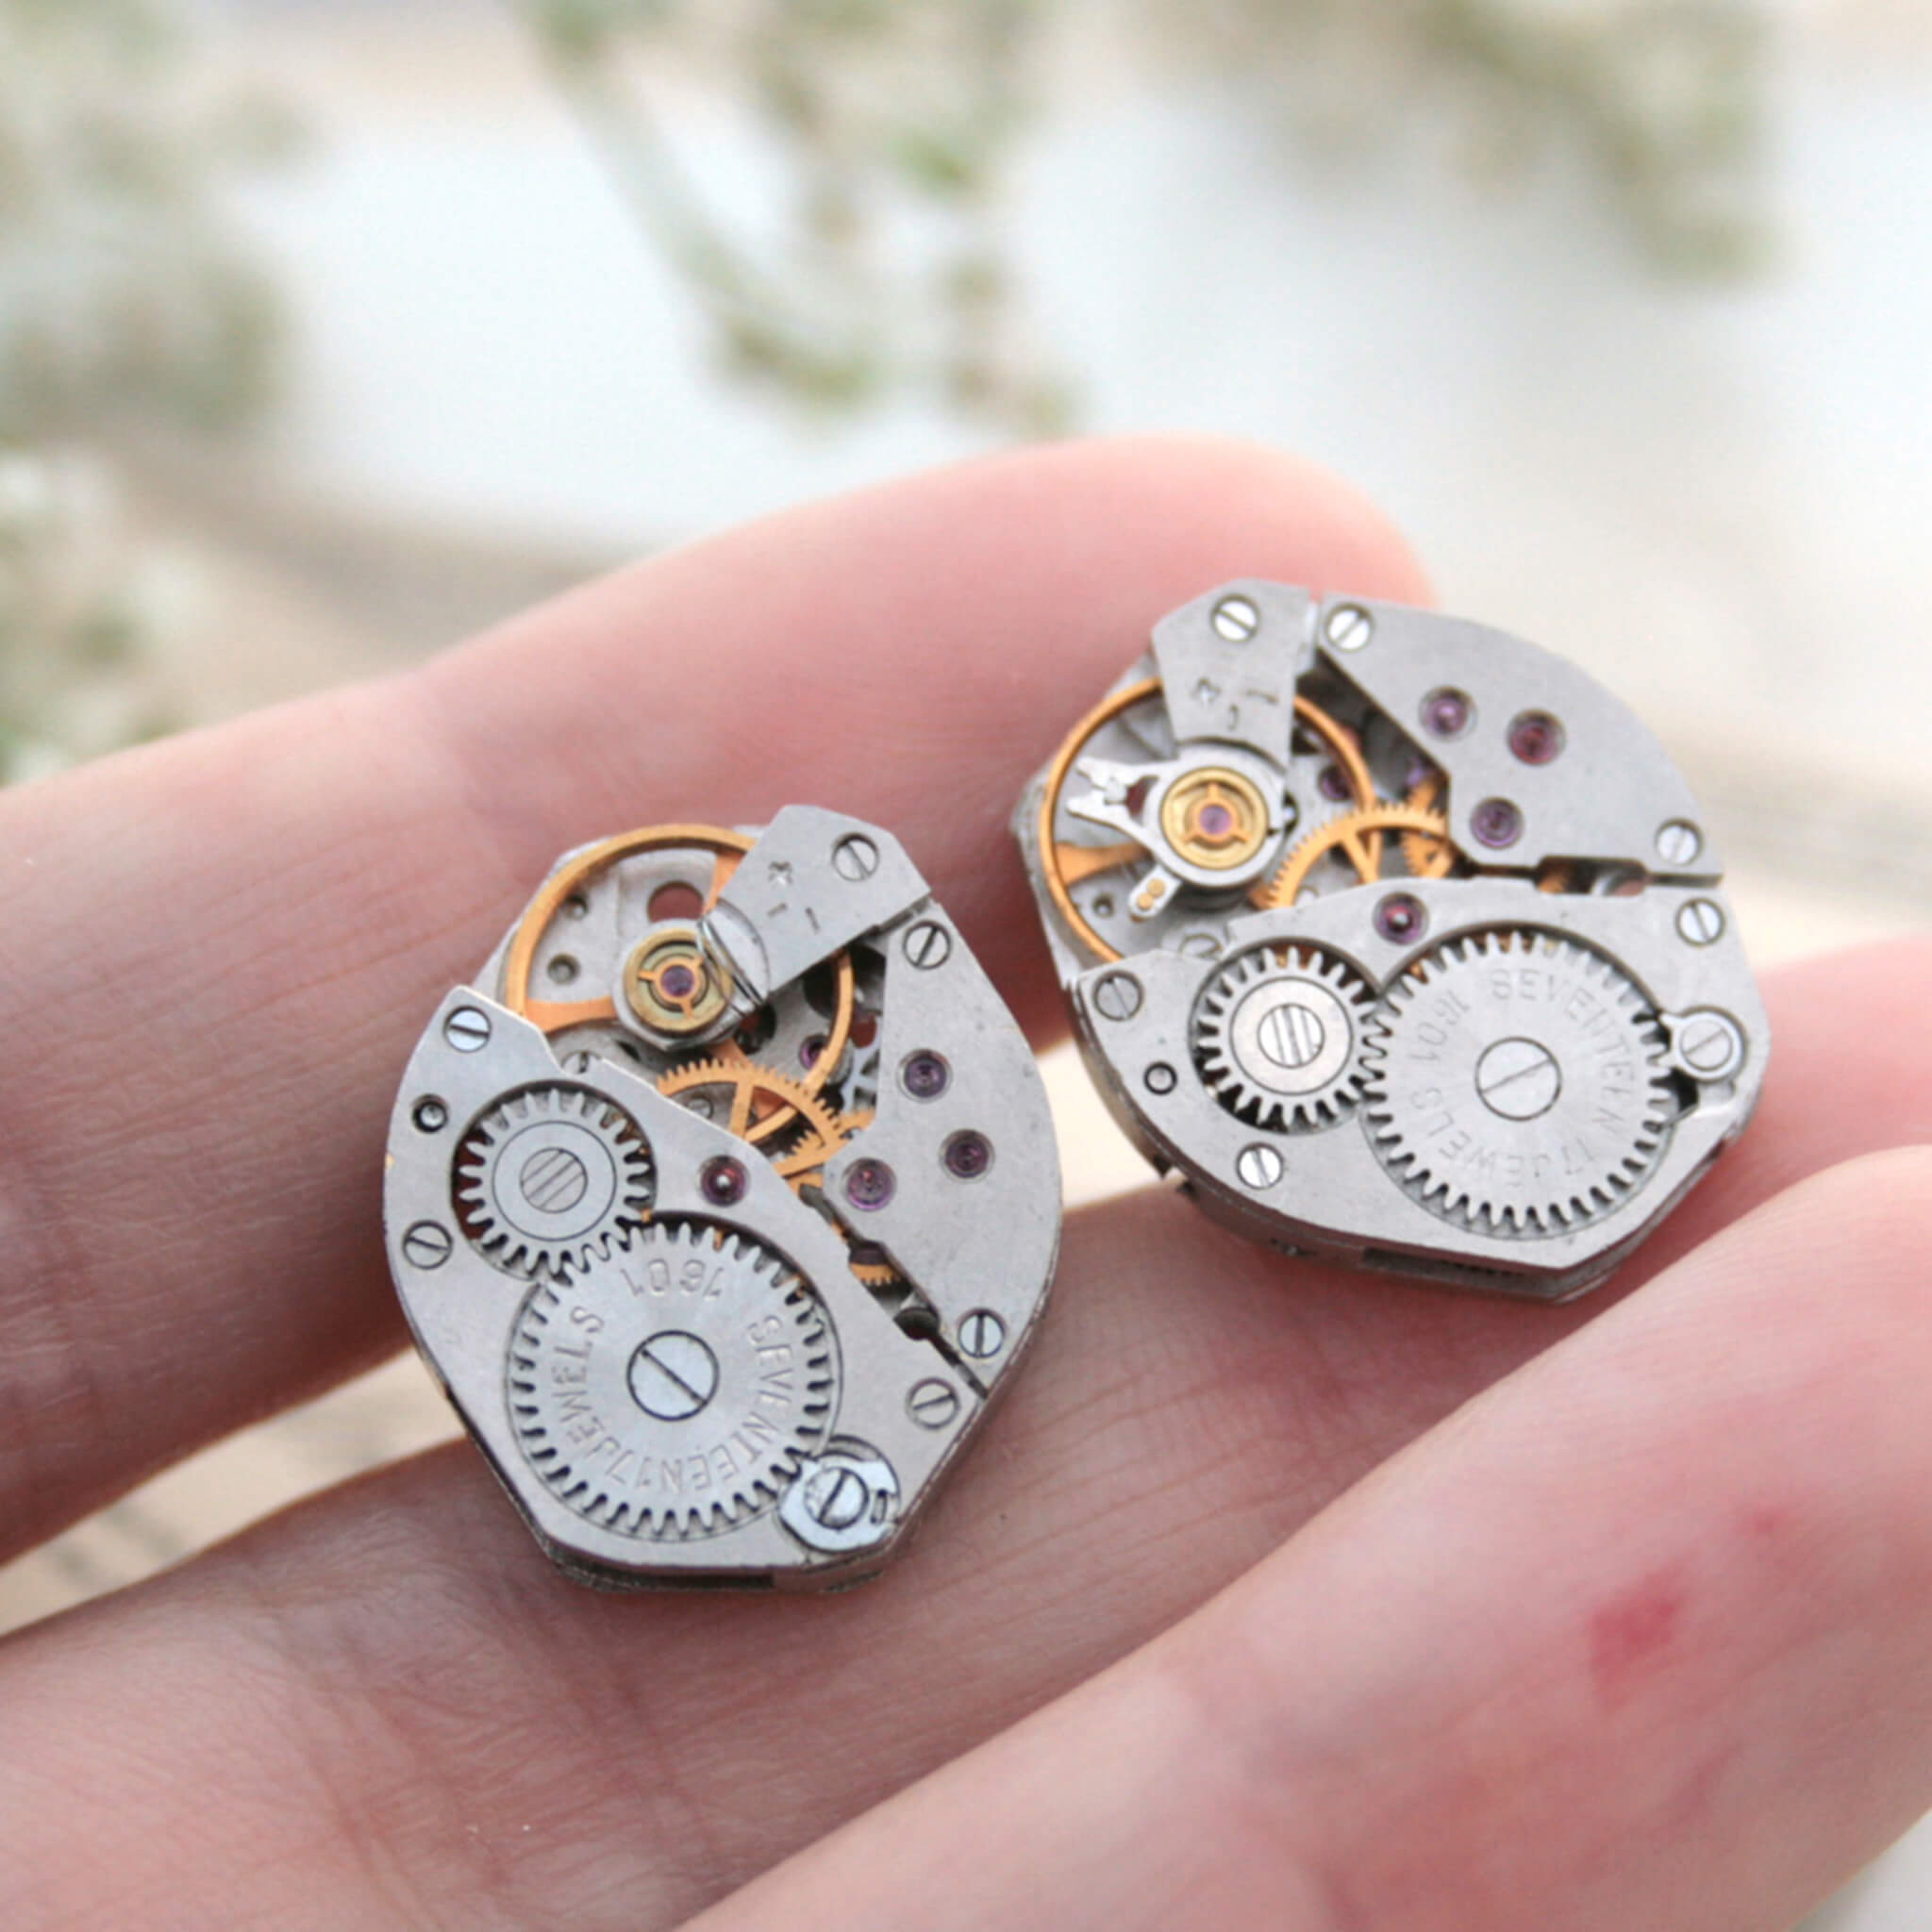 watch movements turned into stud earrings lying on a hand